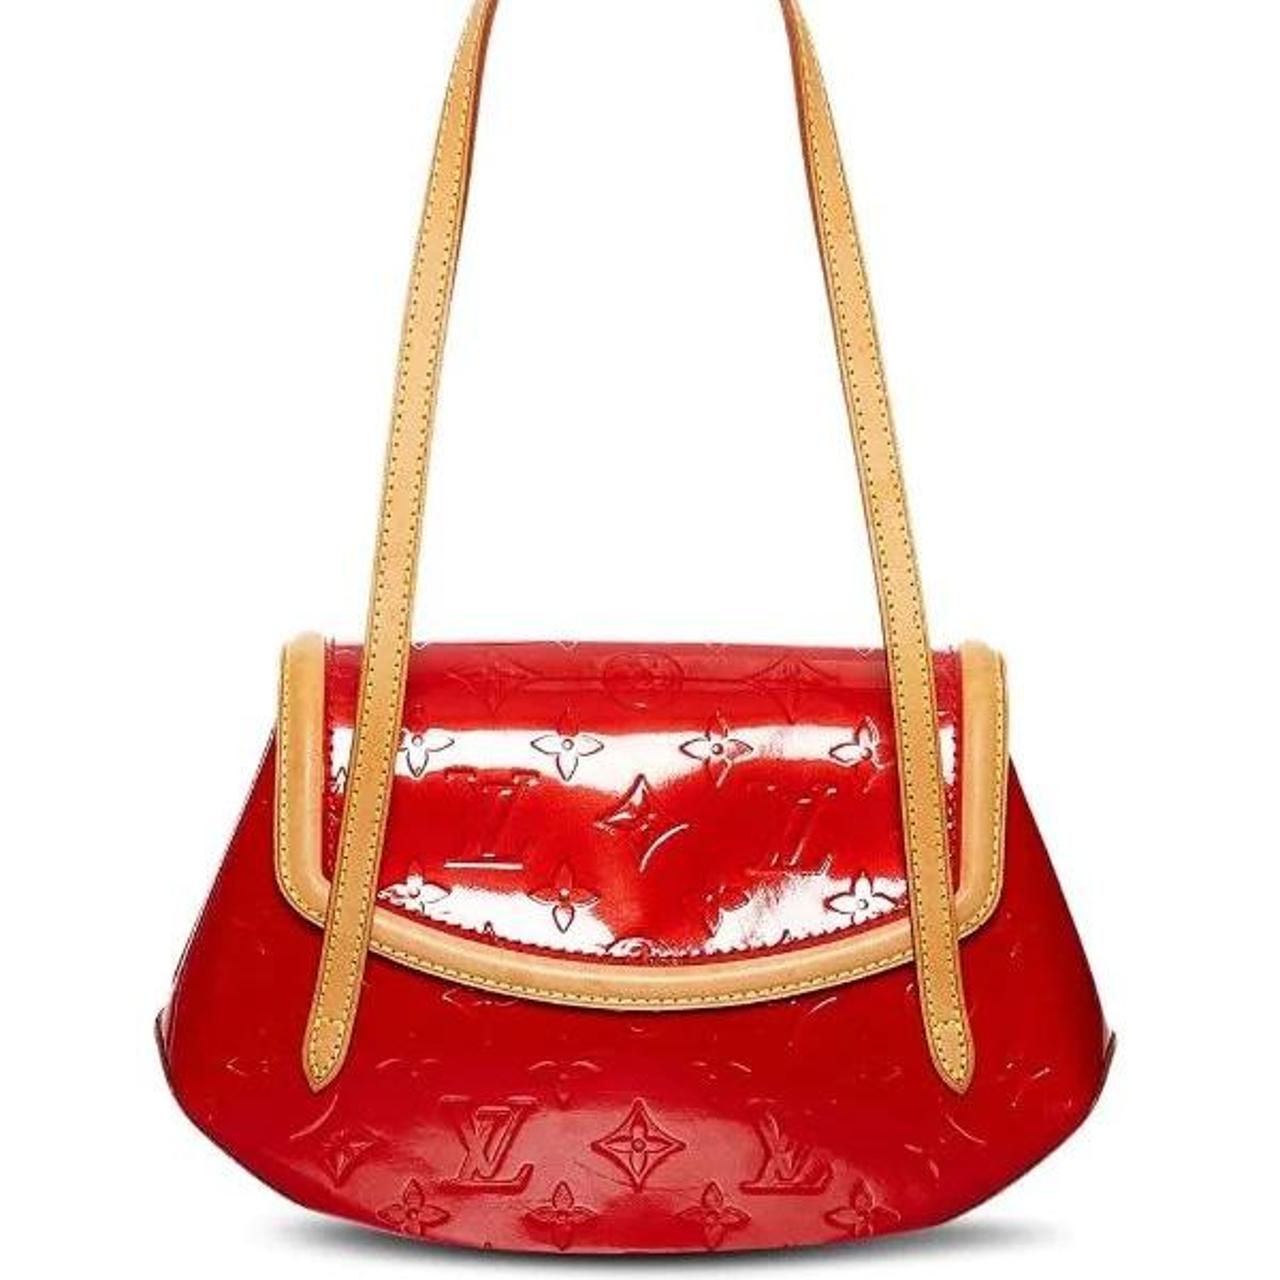 Louis Vuitton Red Monogram Vernis Biscayne Bay PM USED, excellent condition